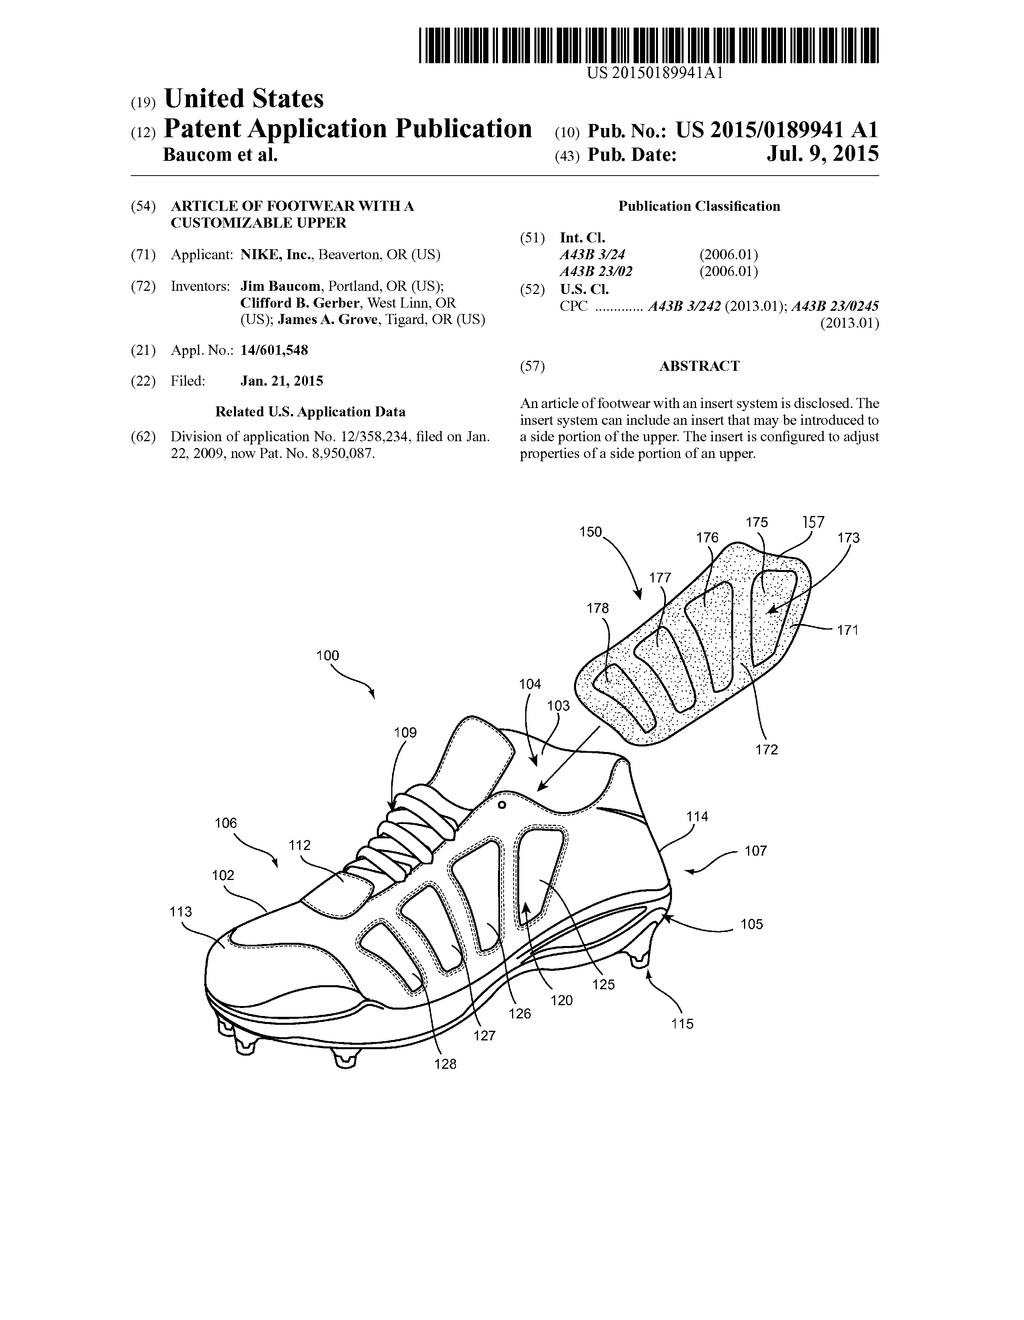 Article of Footwear With a Customizable Upper - diagram, schematic, and image 01